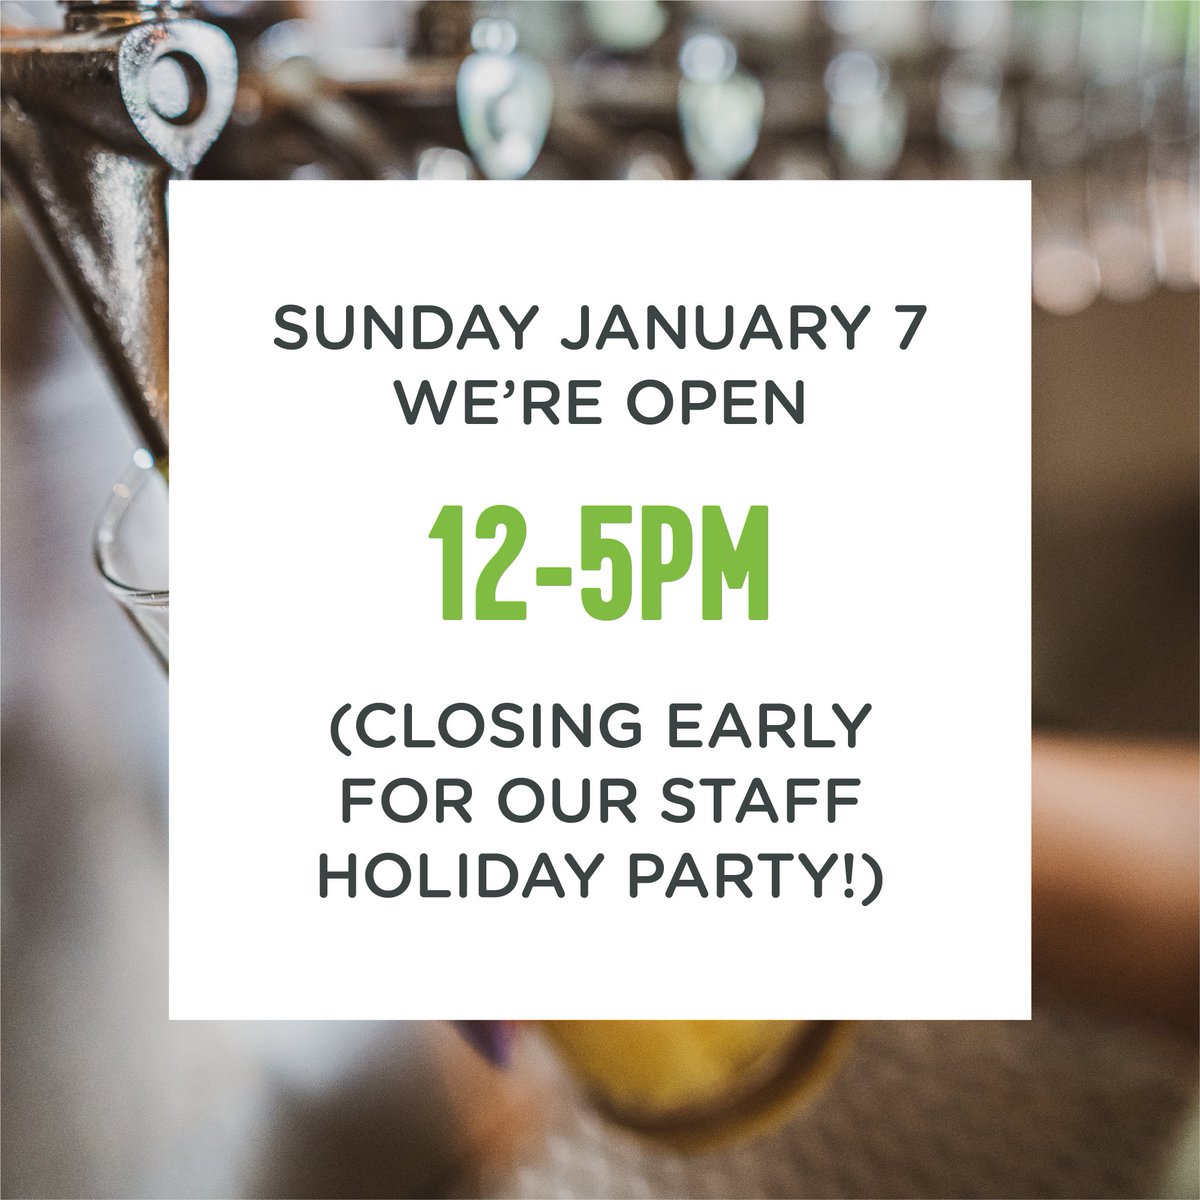 Thanks for an amazing 2023! Closing a little early 1/7 so our team can celebrate together. Normal hours resume Monday! 🍻 #happyplace